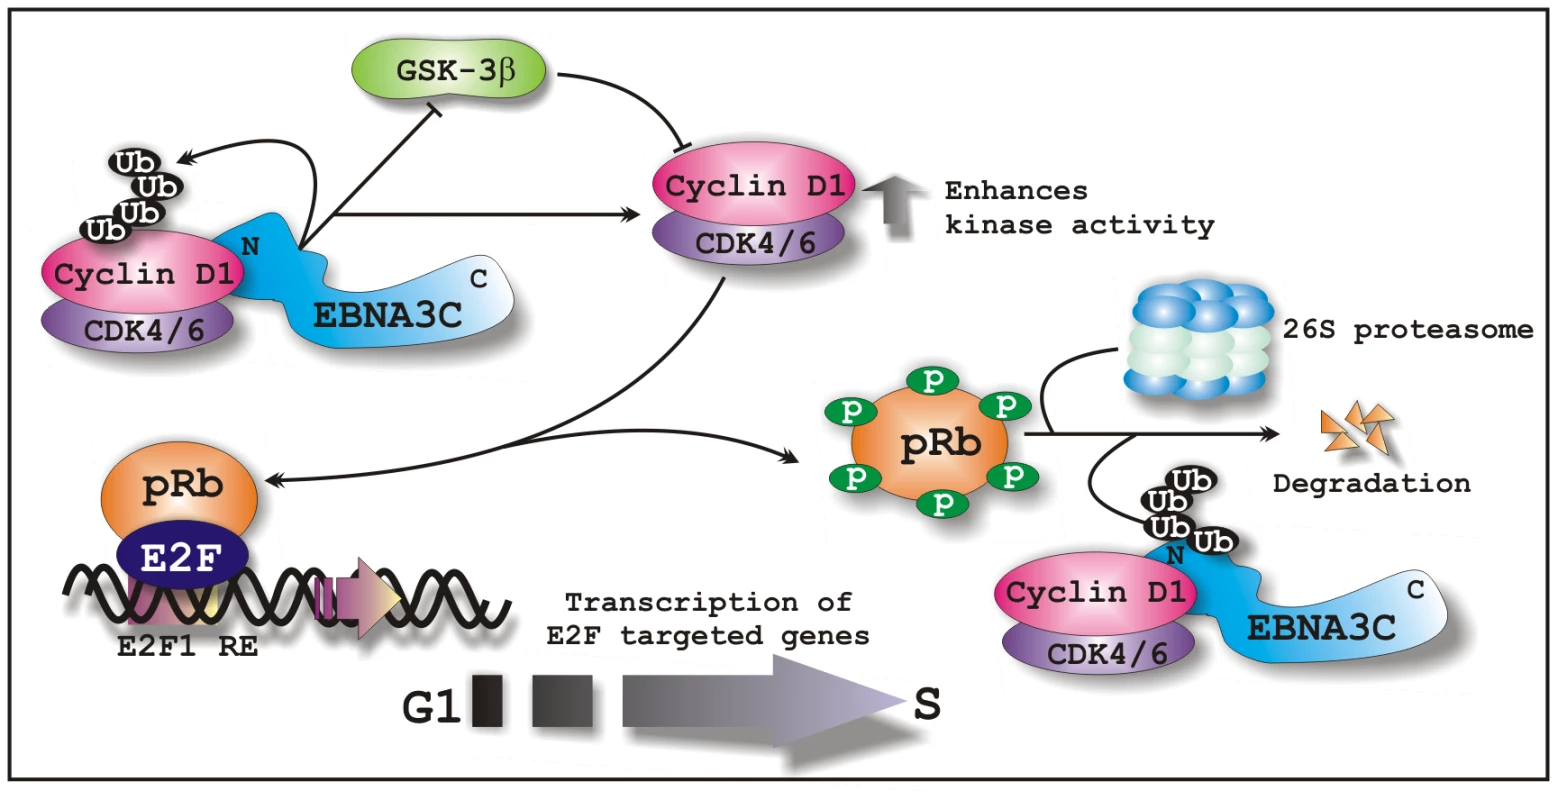 A schematic illustration of how EBNA3C regulates Cyclin D1 stability and functions to facilitate G1 to S phase transition in EBV positive cells.